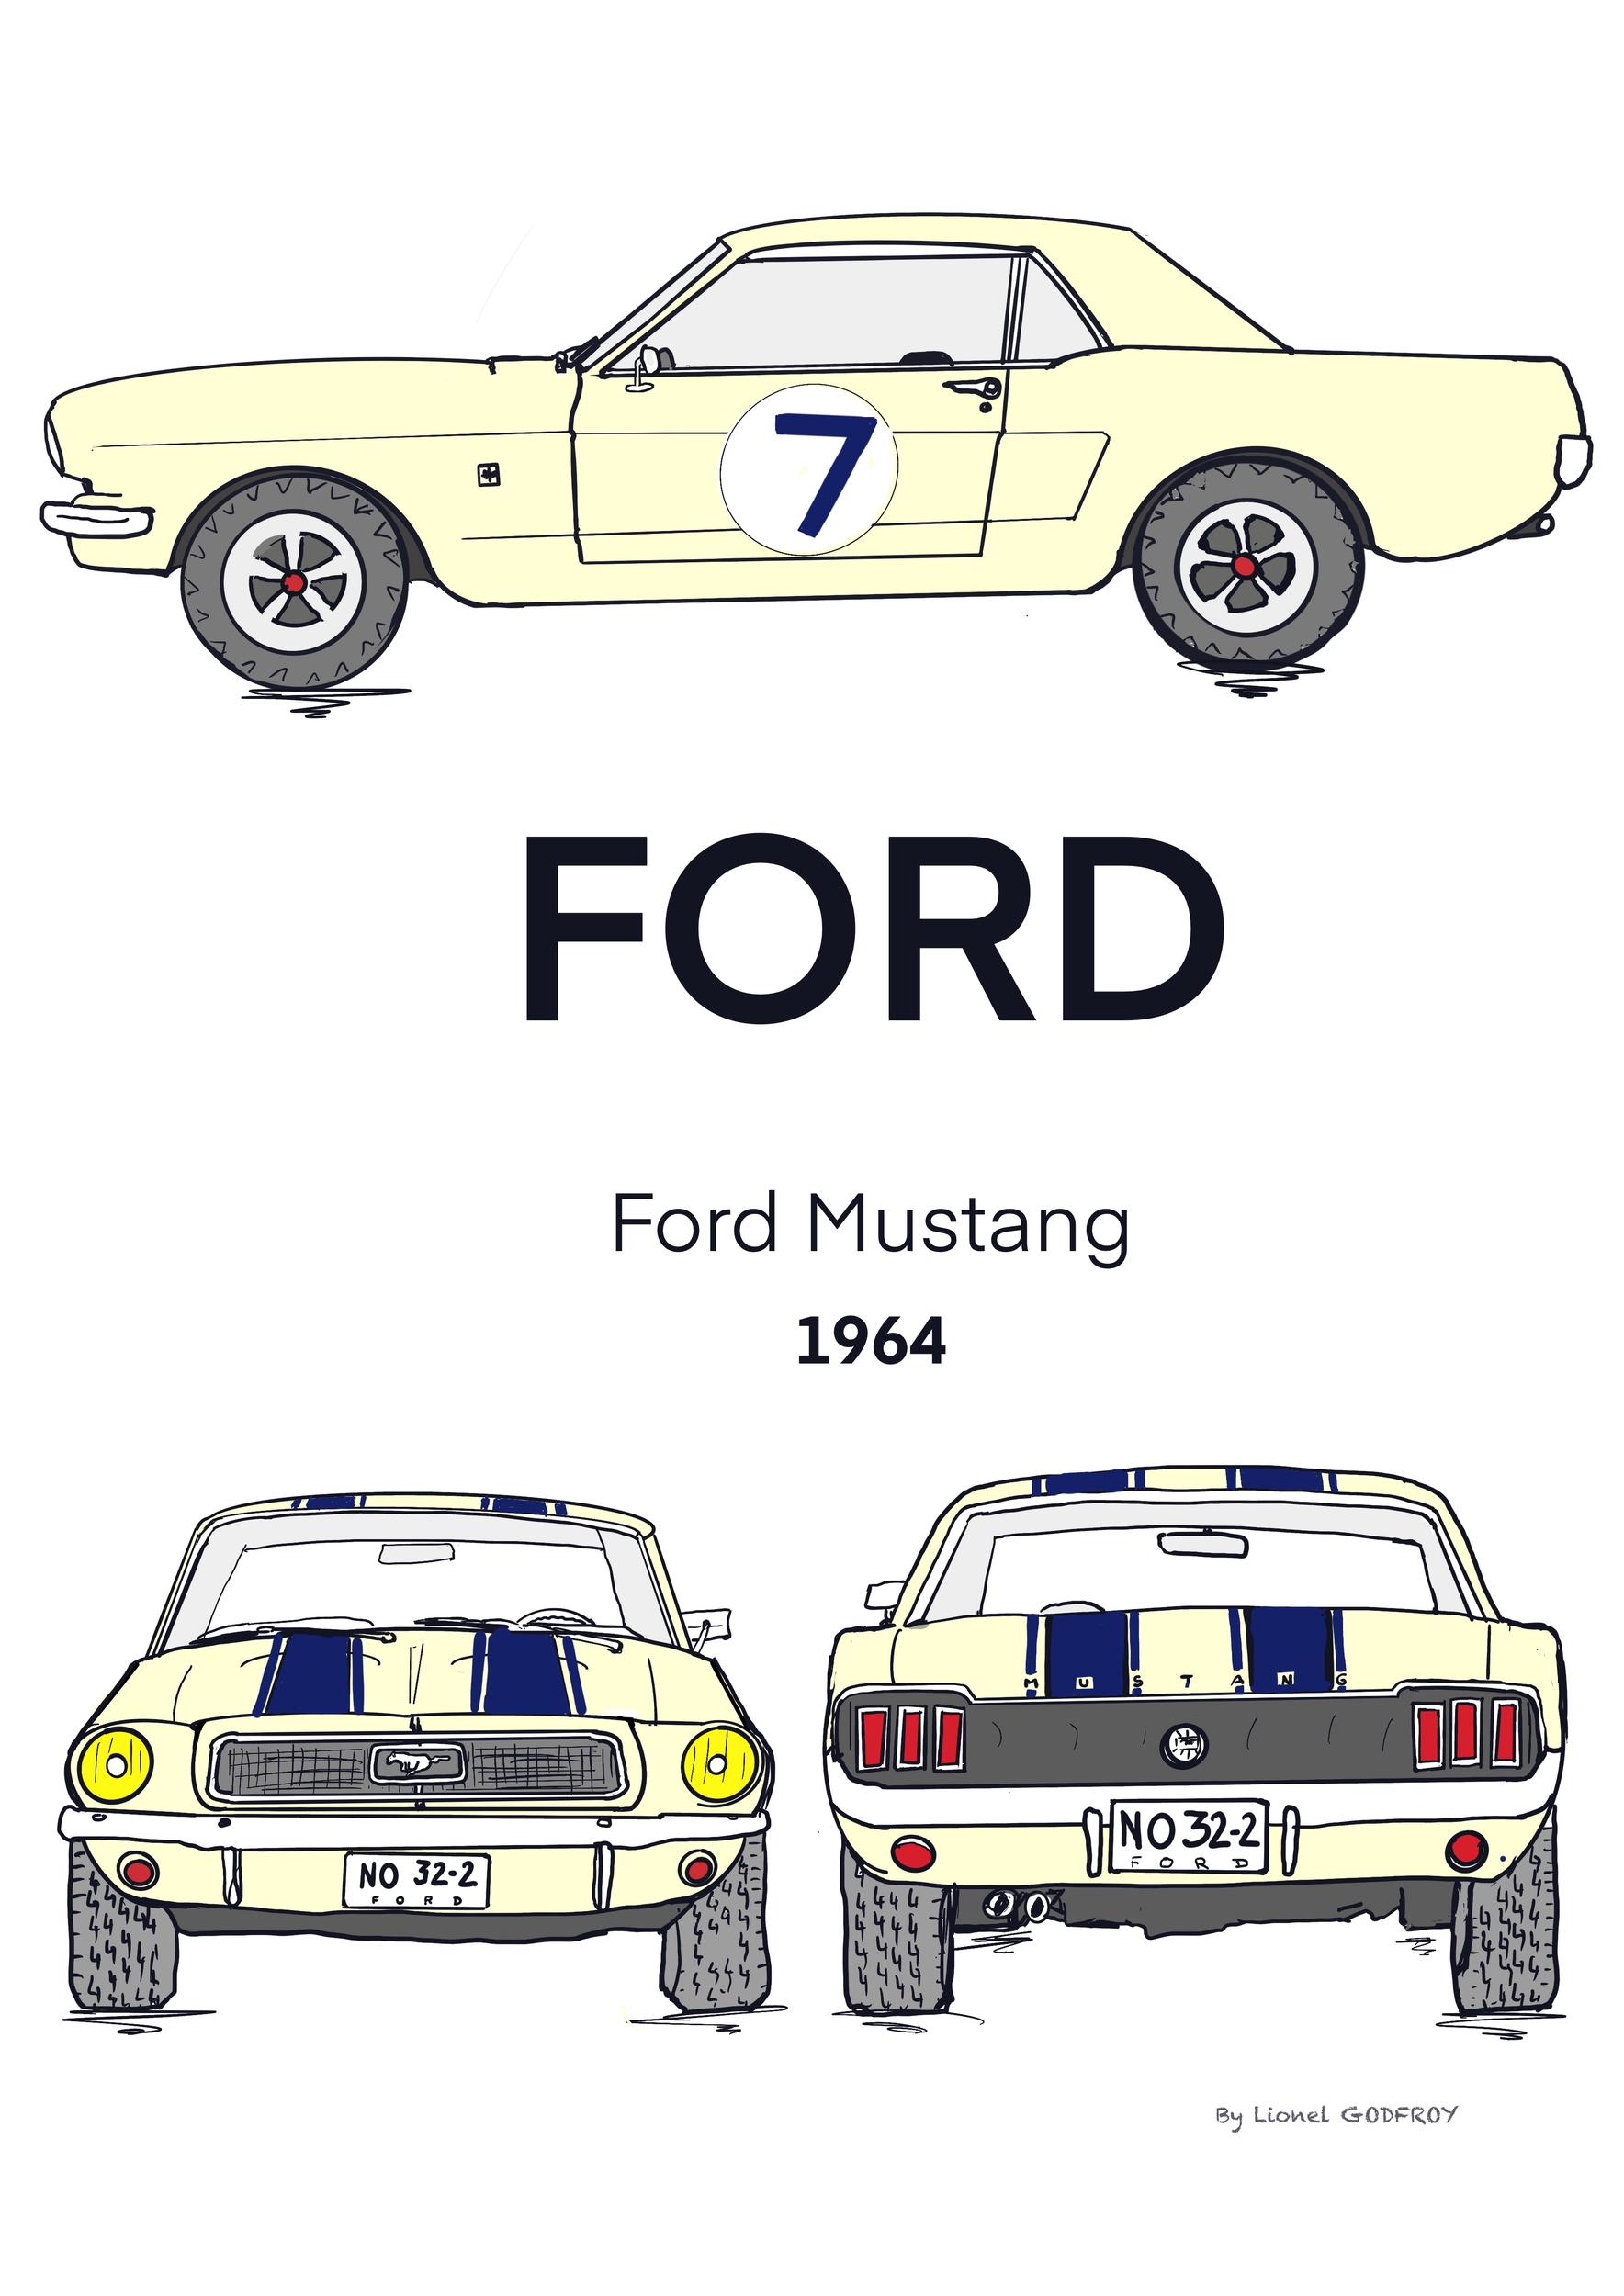 Affiche_Ford_Mustang